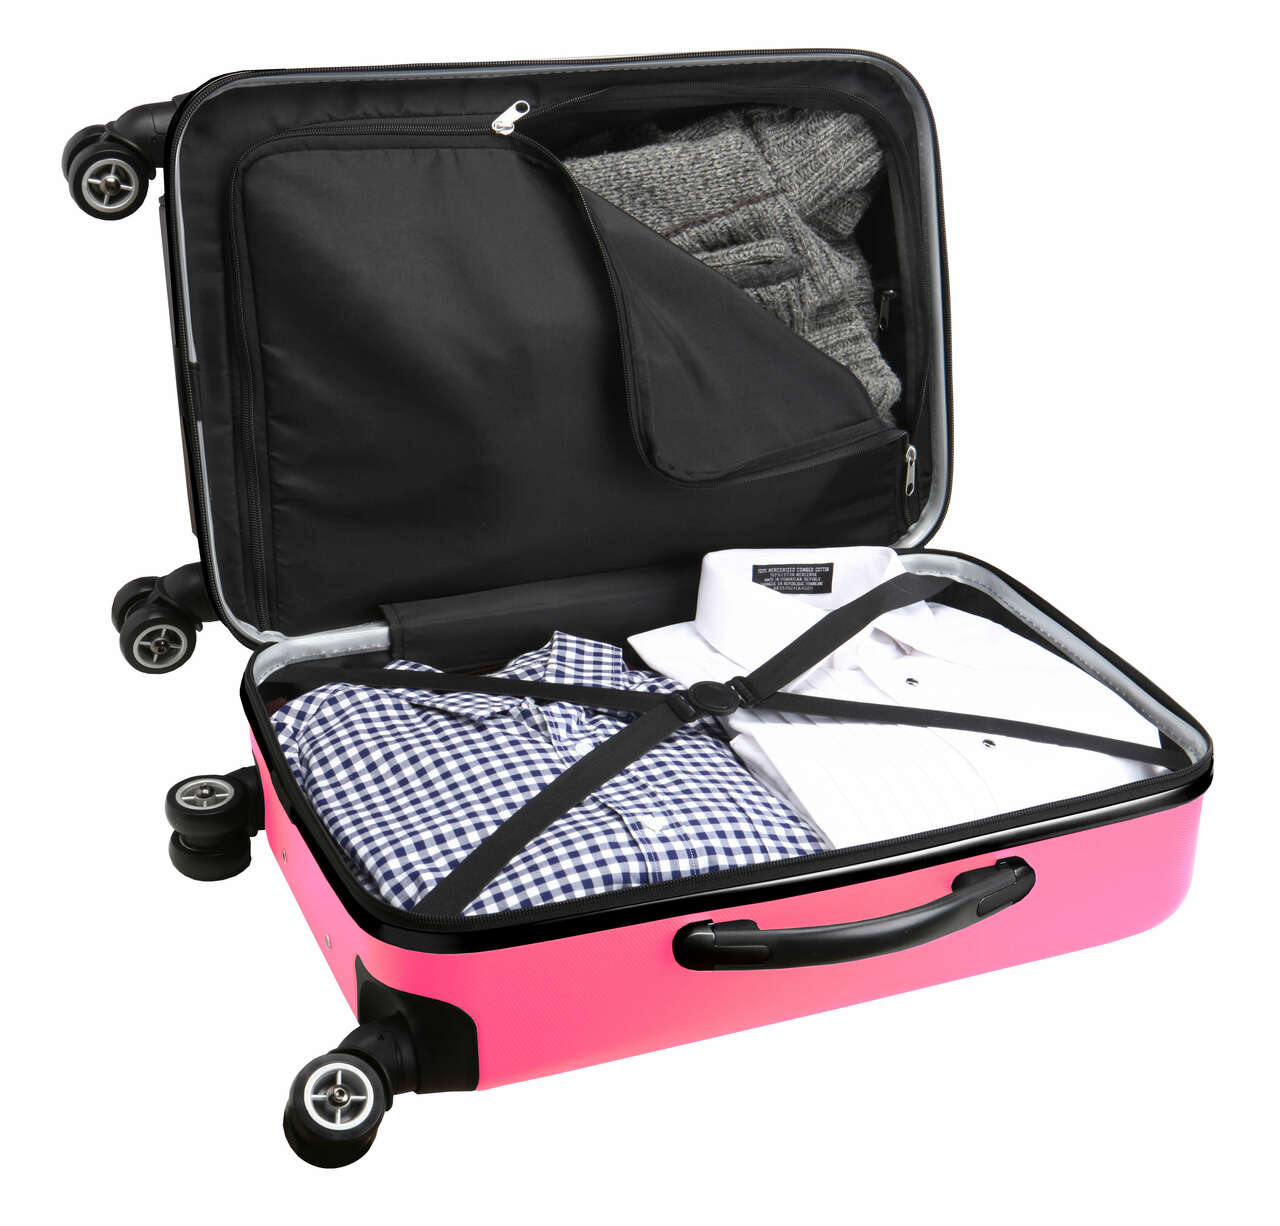 Toronto Blue Jays 20" Pink Domestic Carry-on Spinner